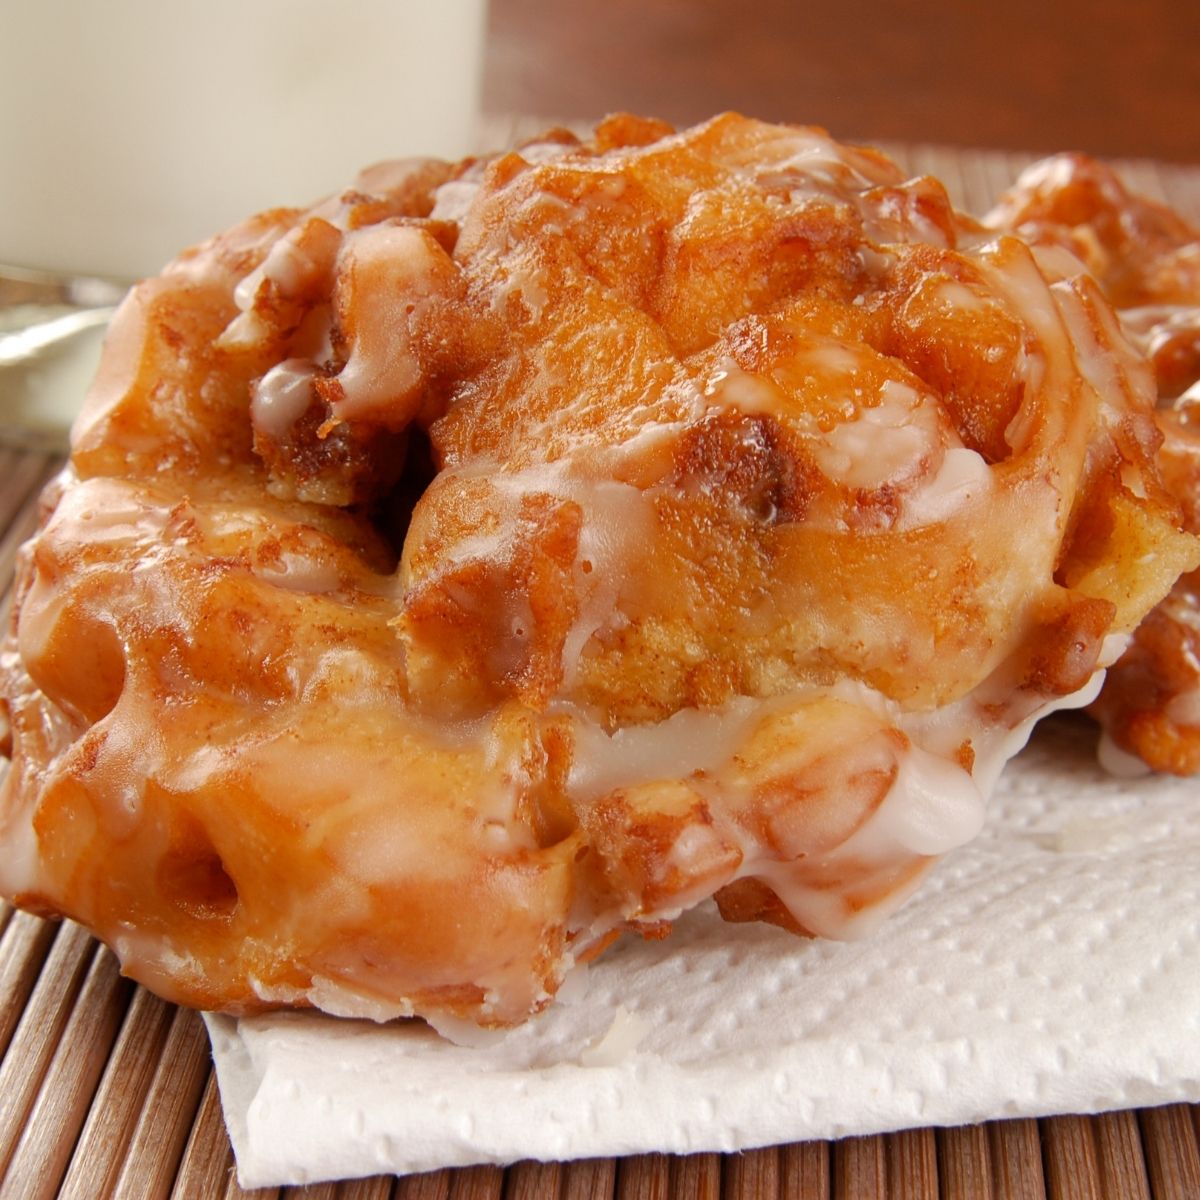 Apple Fritters on paper towel, on bamboo placemat